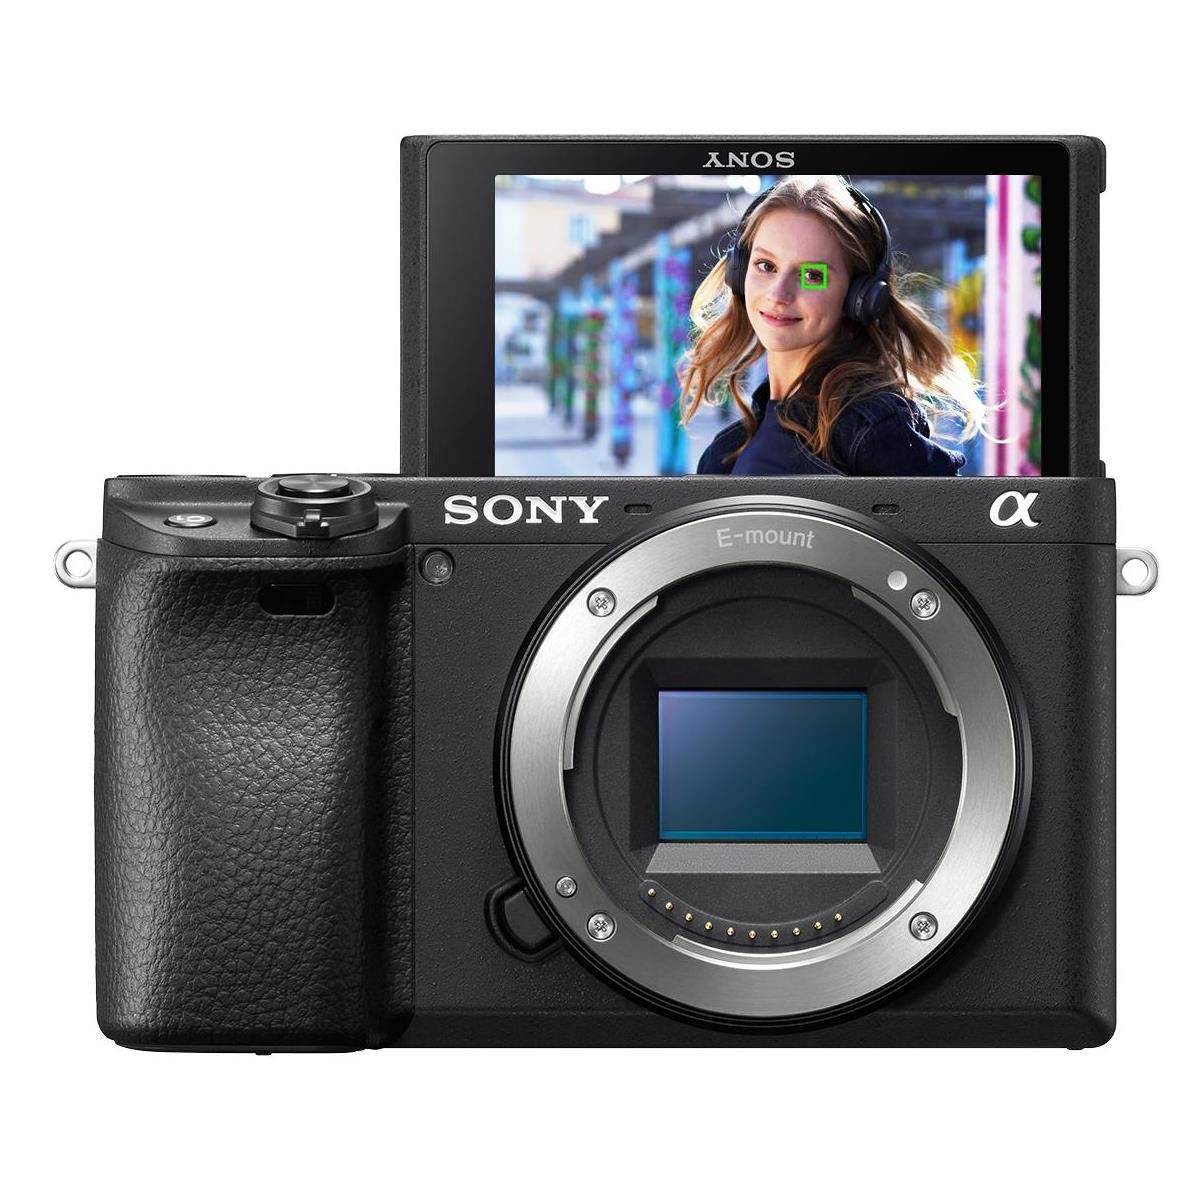 Alpha a6400 Mirrorless Digital Camera Body - Bundle with Camera Case, 32GB SDHC U3 Card, Cleaning Kit, Card Reader, Memory Wallet, PC Software Package